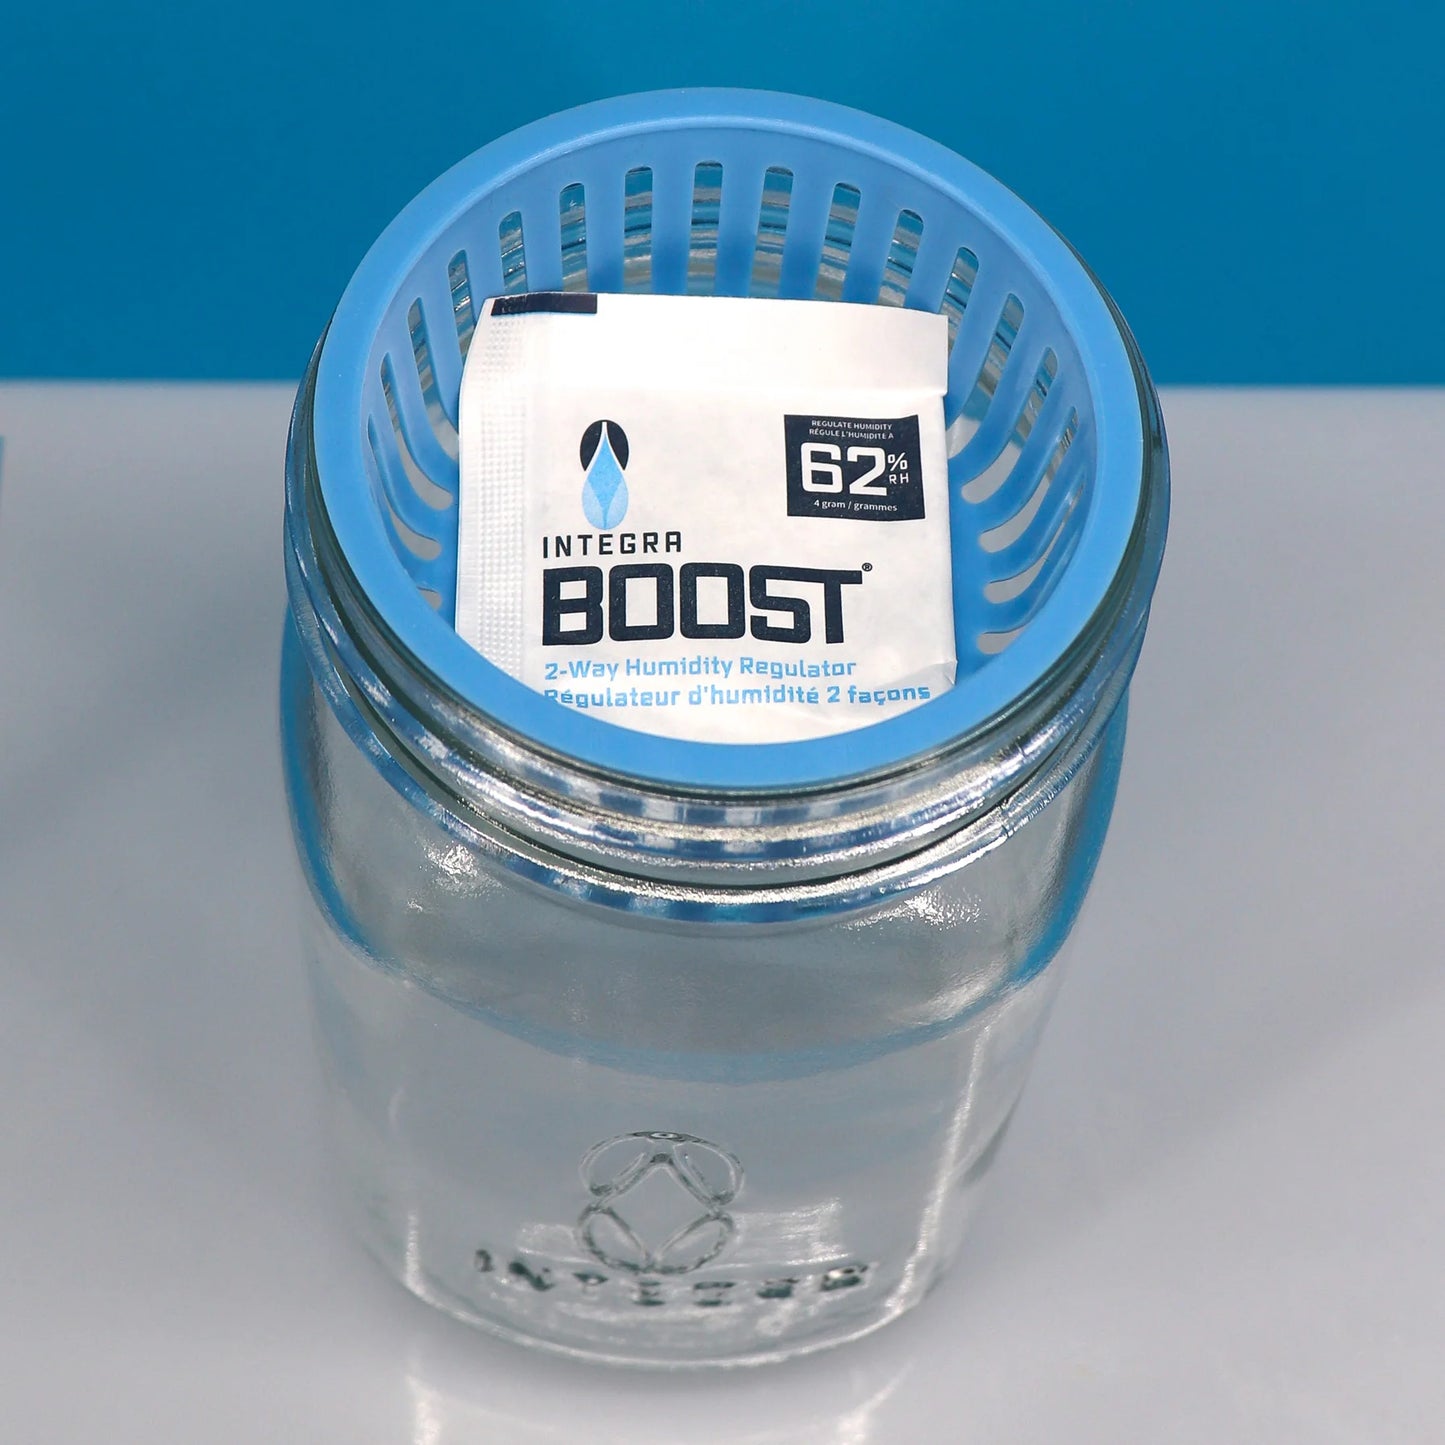 HUMIDITY CONTROL JAR - KIT WITH 3 BOOST® PACKS